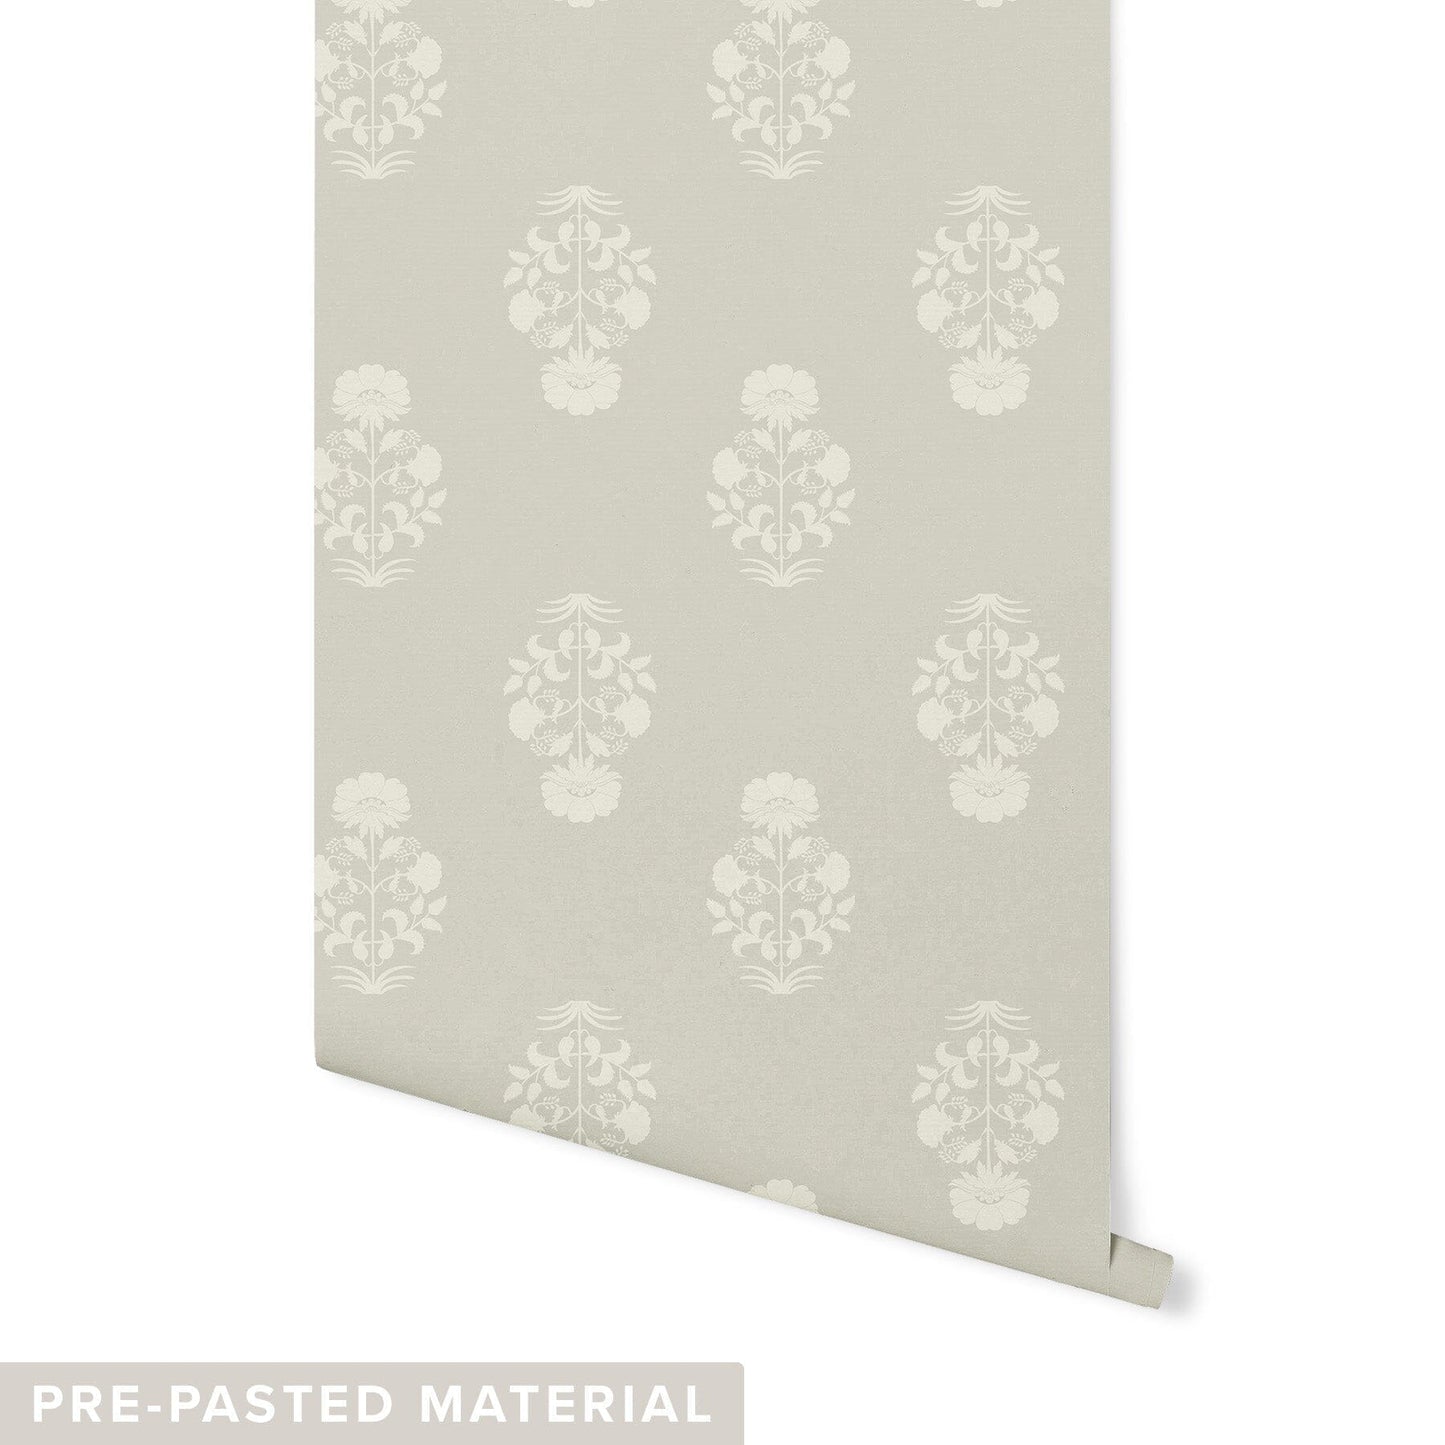 Forest Bouquet Wallpaper Wallpaper Mia Parres Pre-pasted Light Loon DOUBLE ROLL : 46" X 4 FEET